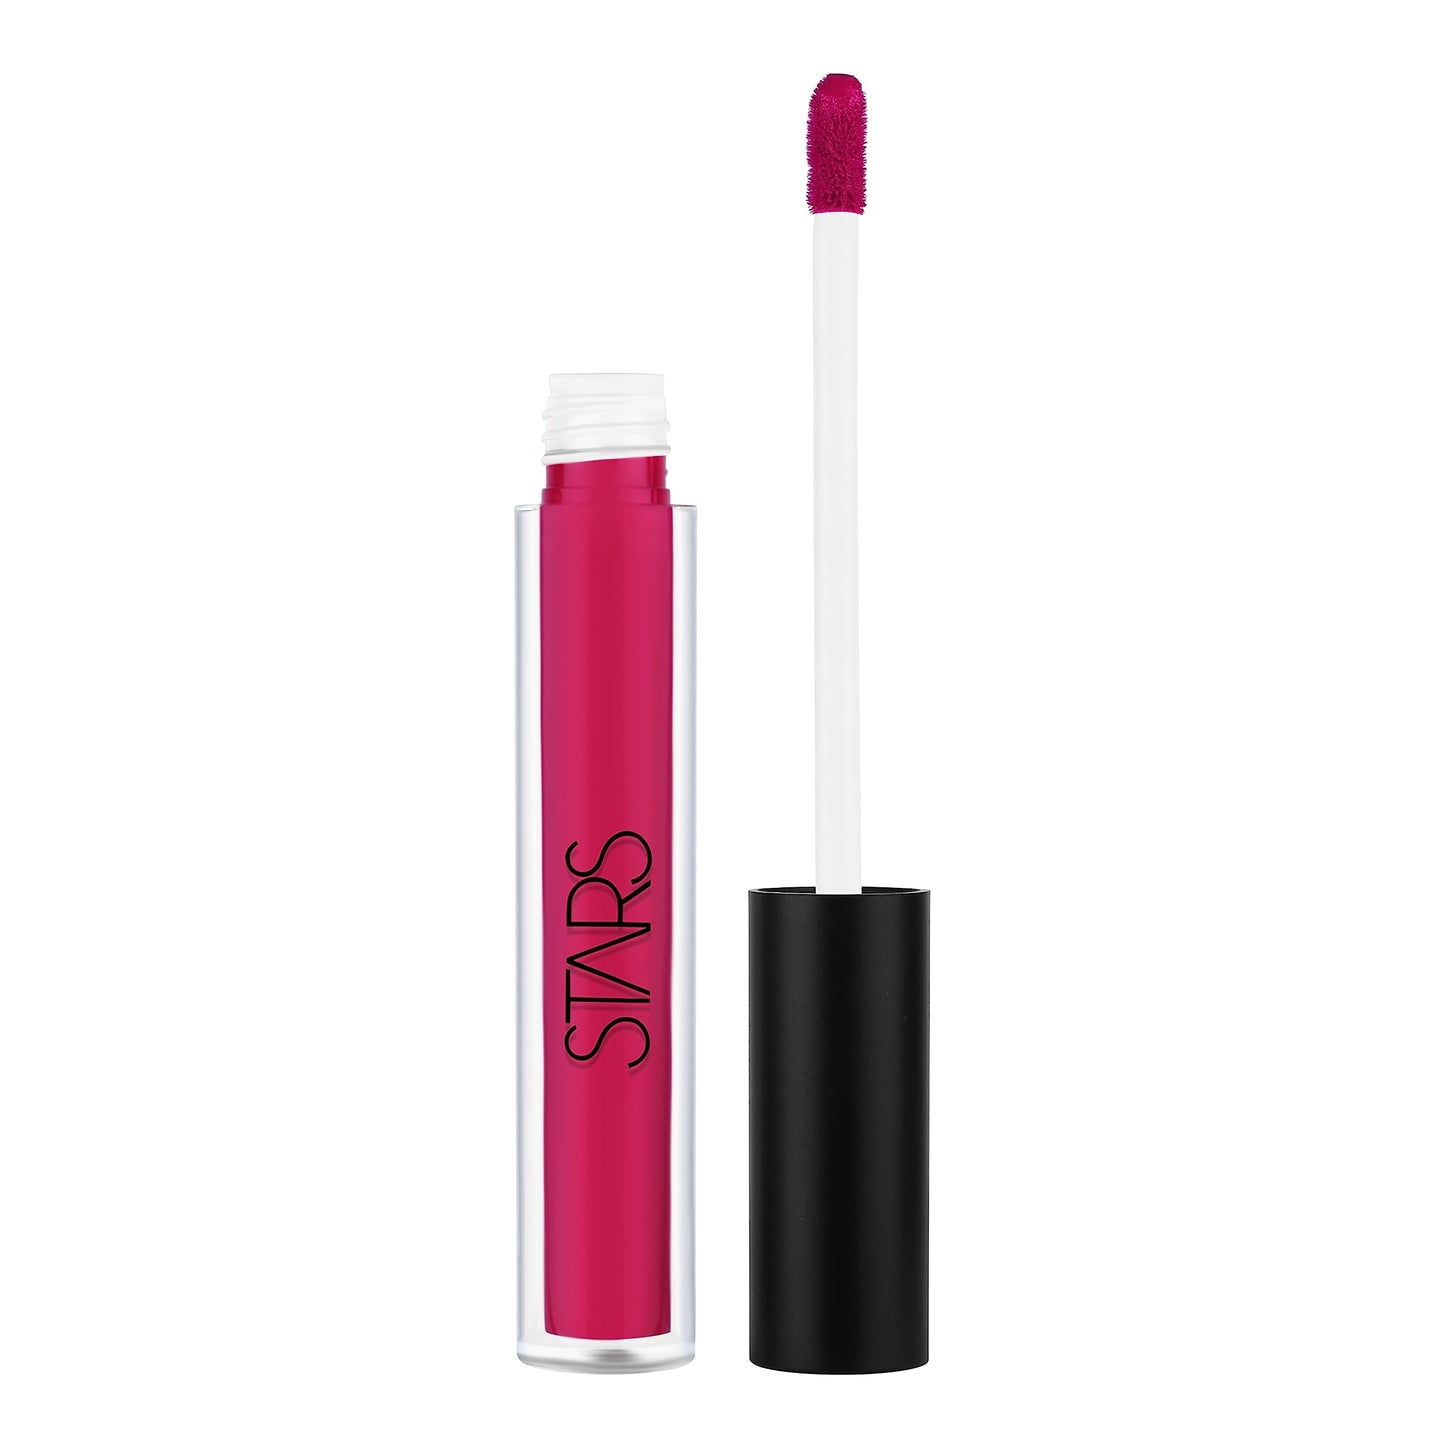 Star's Cosmetics Lip Pop Liquid Lipstick, Light Weight, Long Lasting, Water Proof, Smudge Proof & Transfer Proof, Highly Pigmented, Matte Finish Lipstick For Girl & Women, (No.11 Wine) 2.6ml